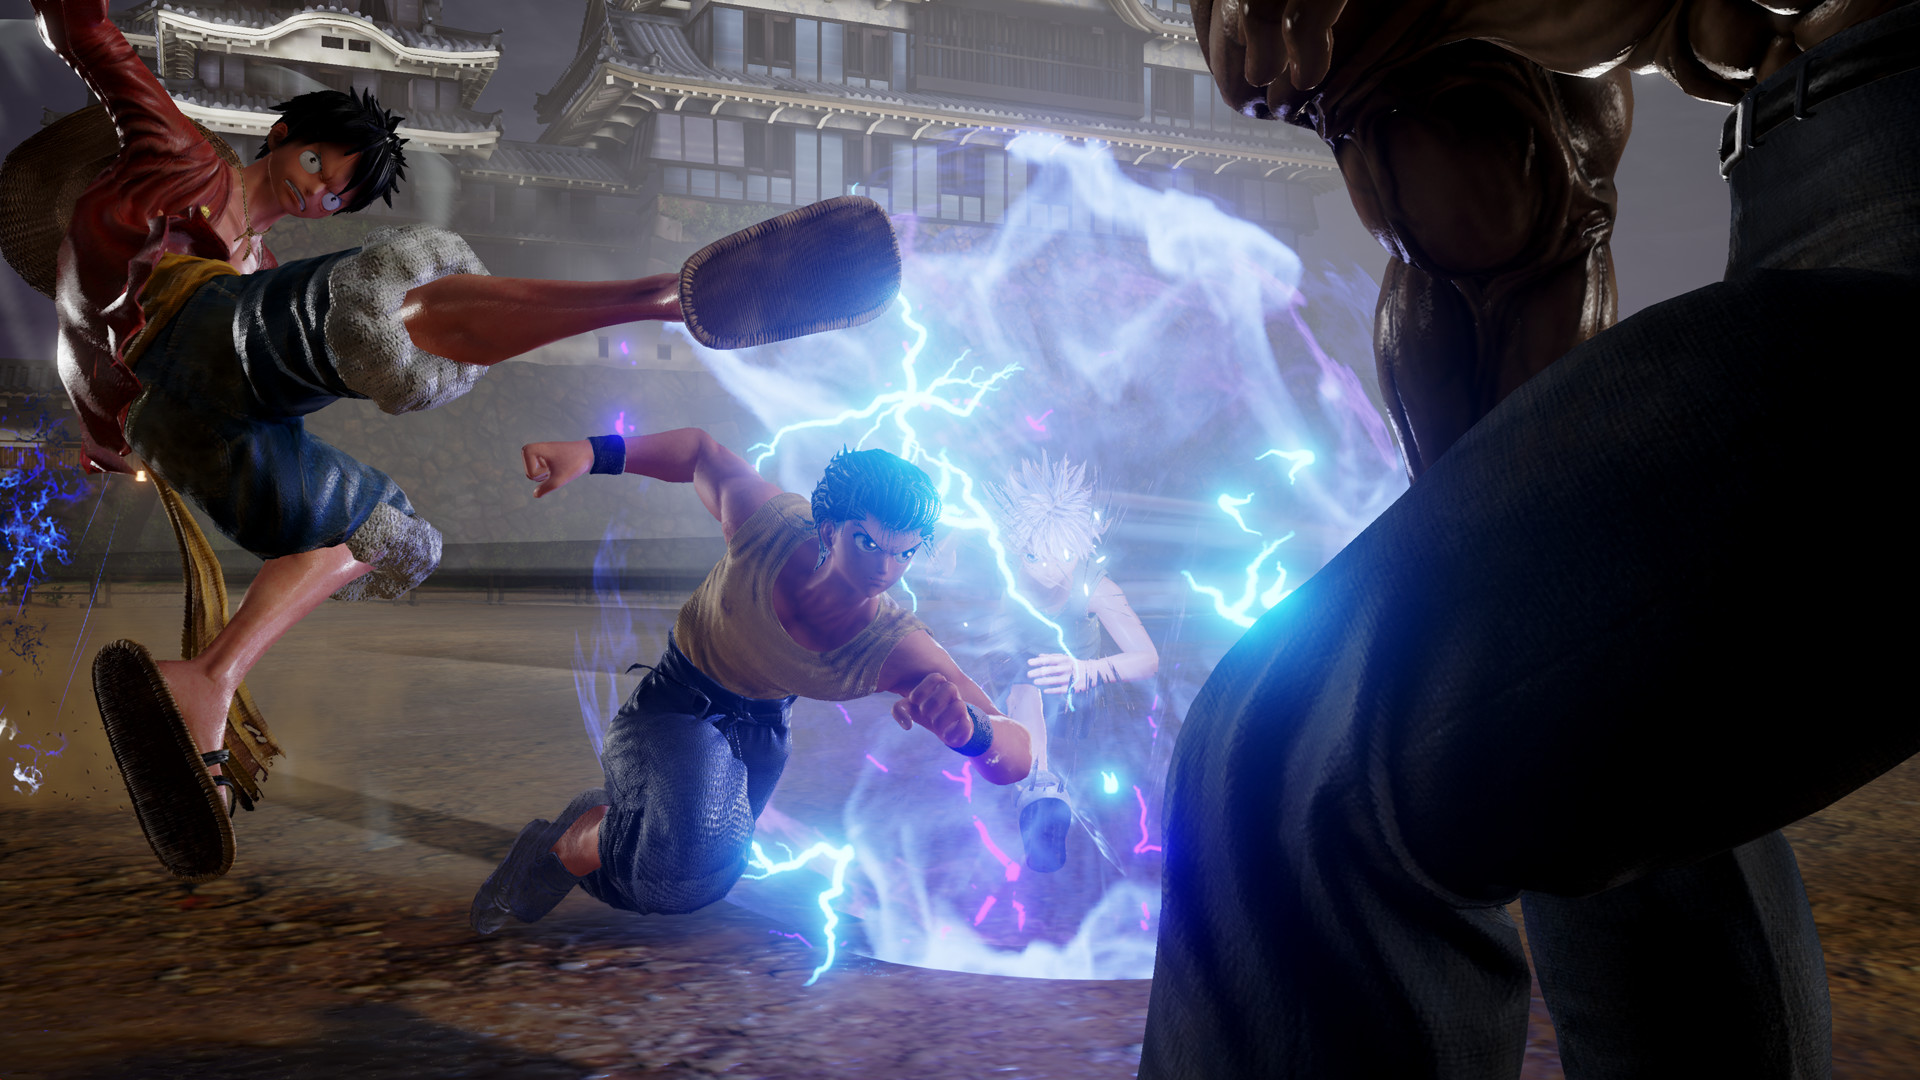 Link Tải Game Jump Force ( Jump Force Free Download )